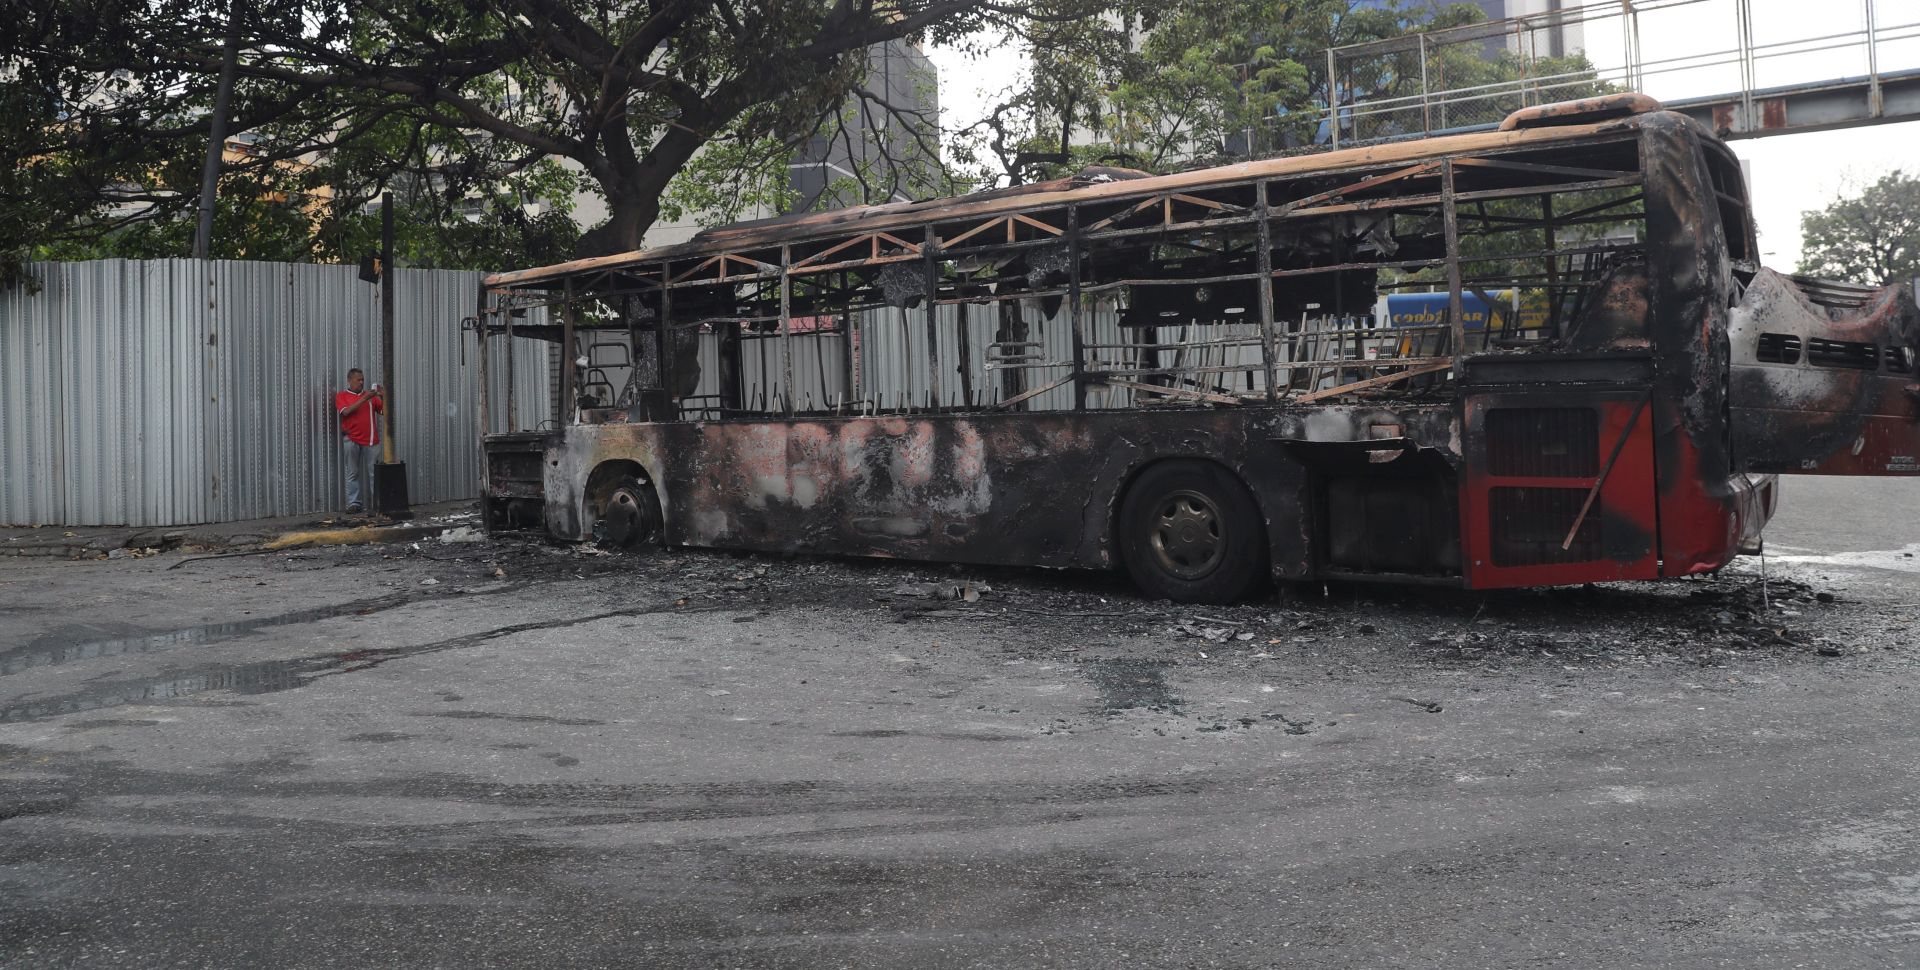 epa07540288 A fire gutted bus on a street in Caracas, Venezuela, 01 May 2019, a day after members of the opposition clashed with govedrnment forces. Reports state that the head of the Venezuelan Parliament Juan Guaido, called 'all Venezuela to the streets' today to continue with the called "Operacion Libertad" (freedom operation), hoping that the President Nicolas Maduro leave power.  EPA/Miguel Gutierrez